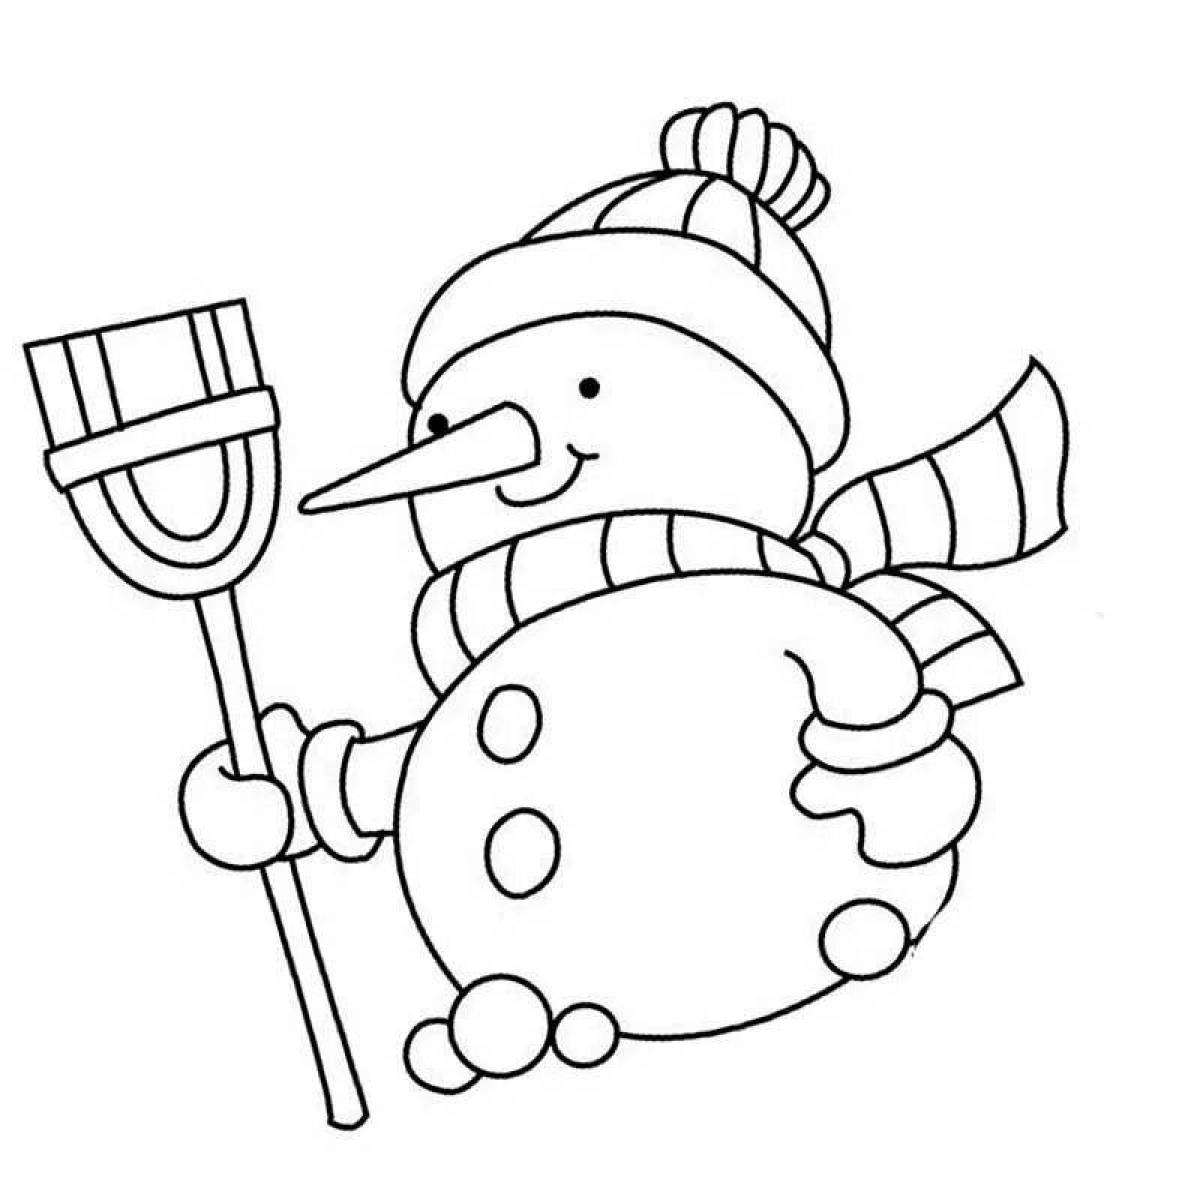 Jocular coloring page funny snowman